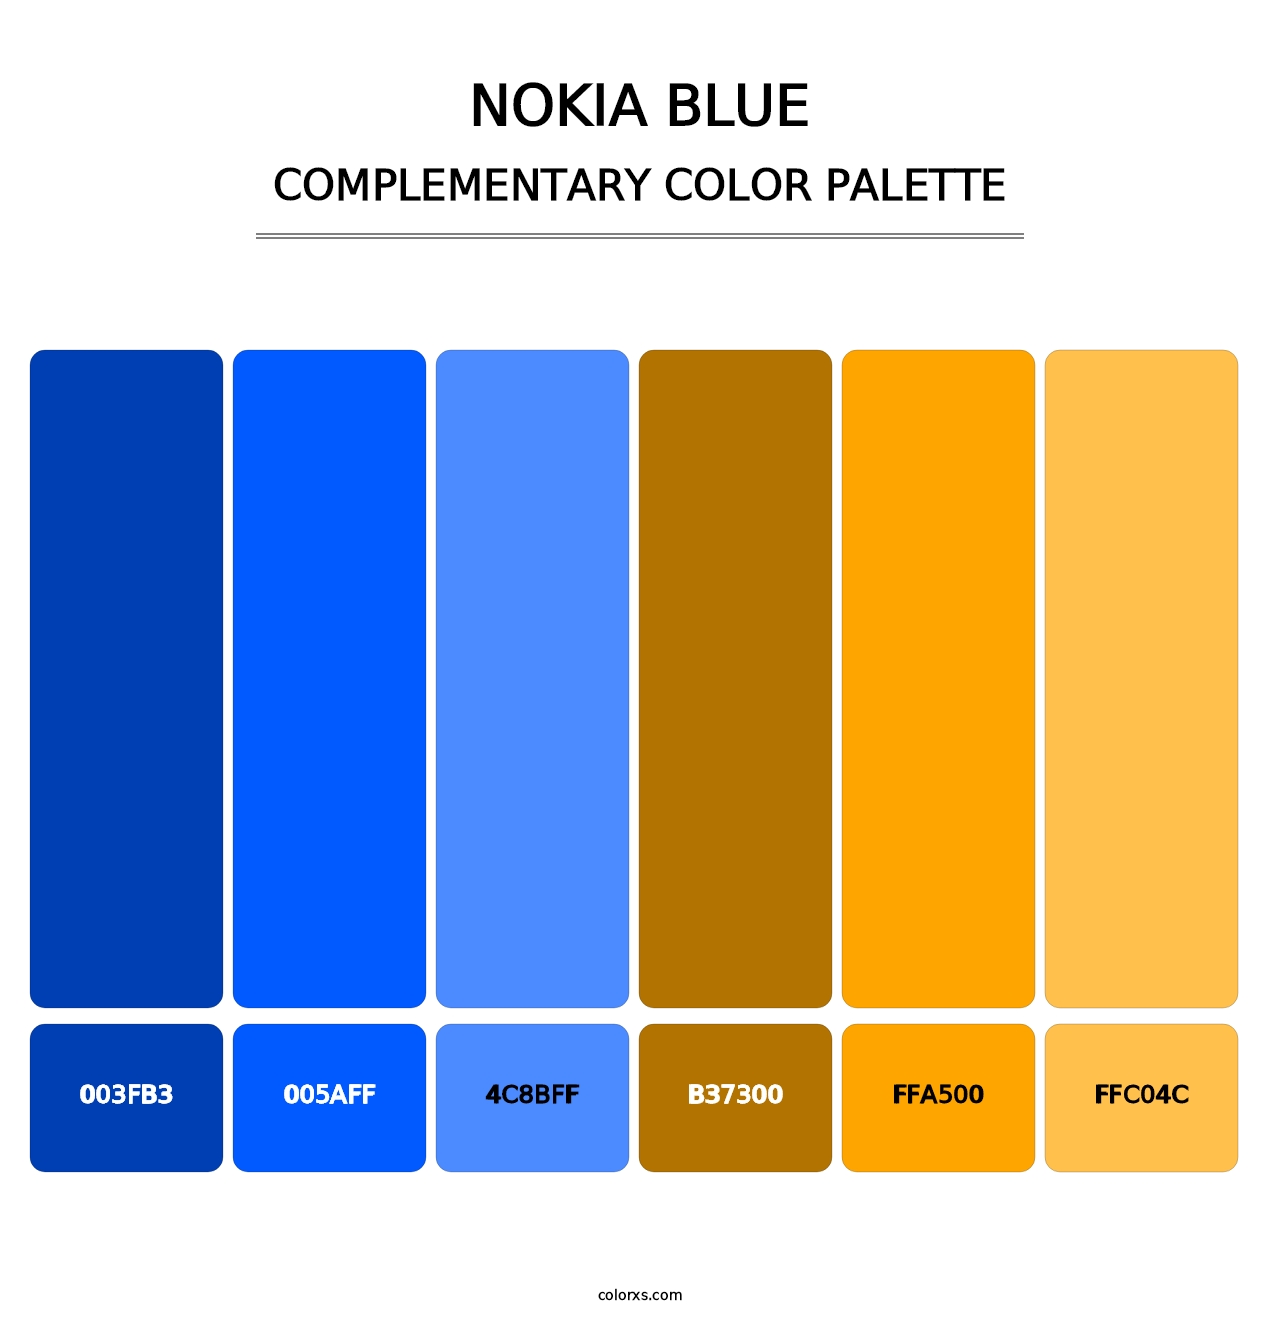 Nokia Blue - Complementary Color Palette